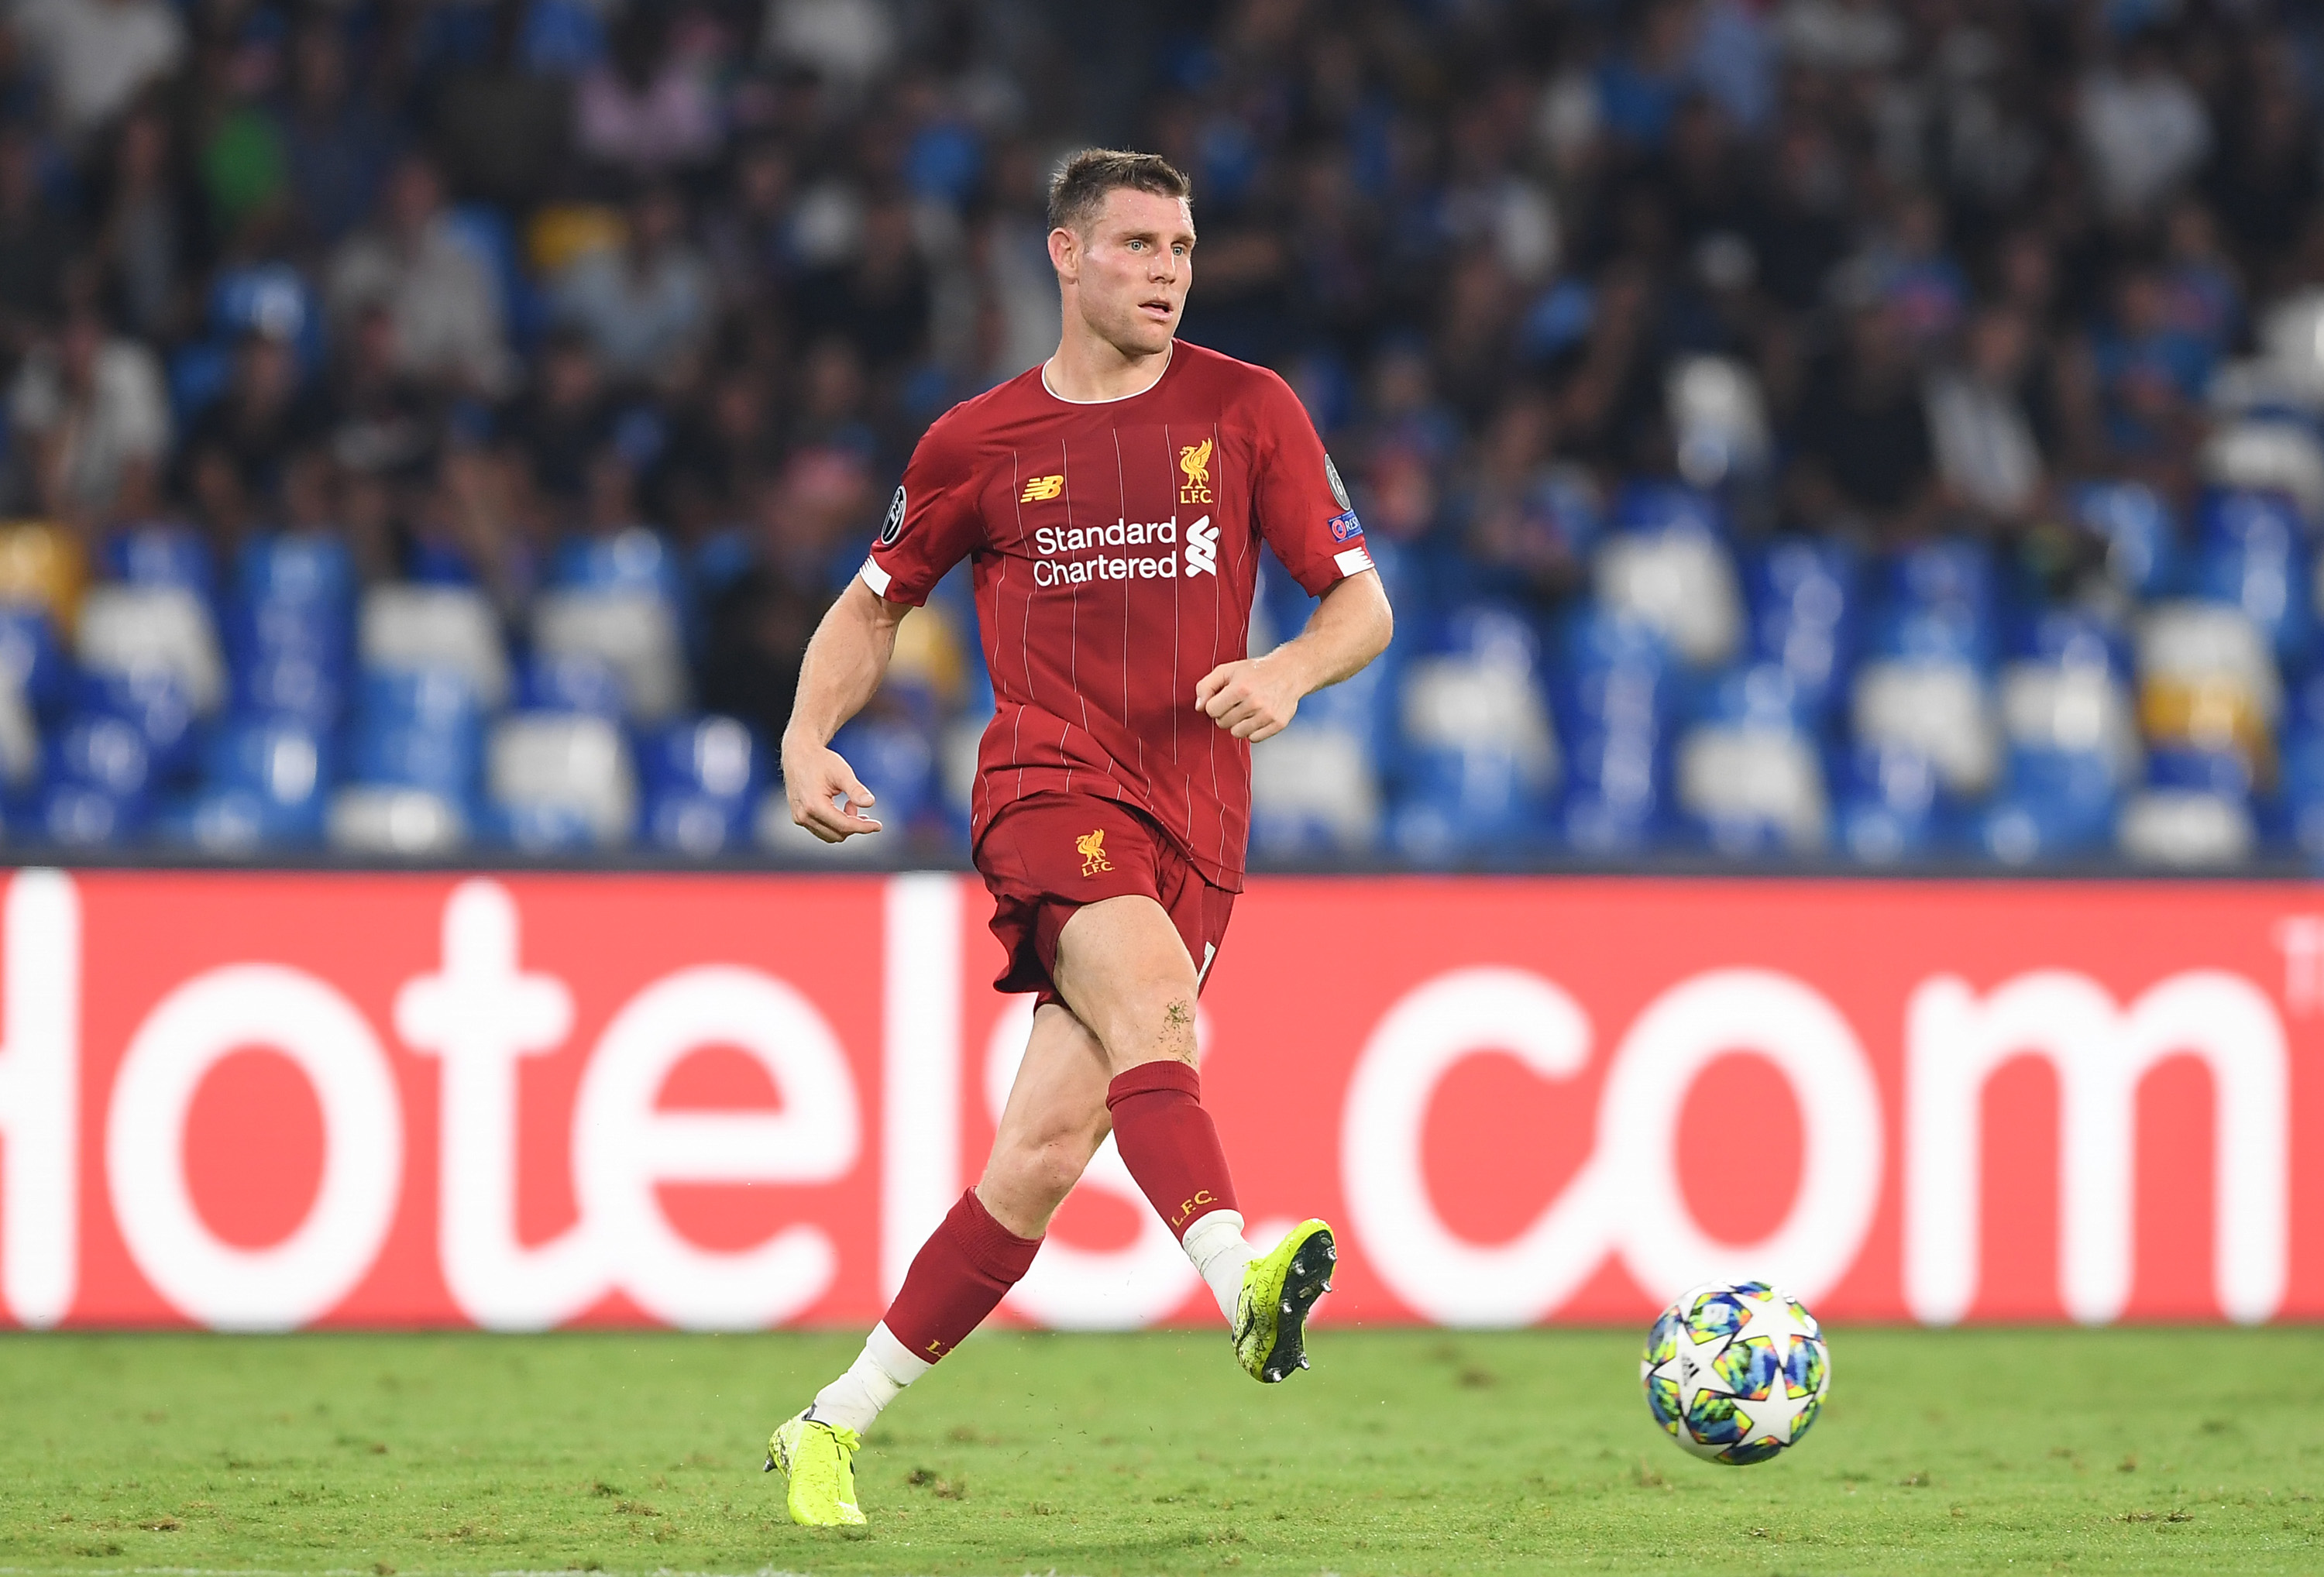 NAPLES, ITALY - SEPTEMBER 17: James Minler of Liverpool FC during the UEFA Champions League group E match between SSC Napoli and Liverpool FC at Stadio San Paolo on September 17, 2019 in Naples, Italy. (Photo by Francesco Pecoraro/Getty Images)